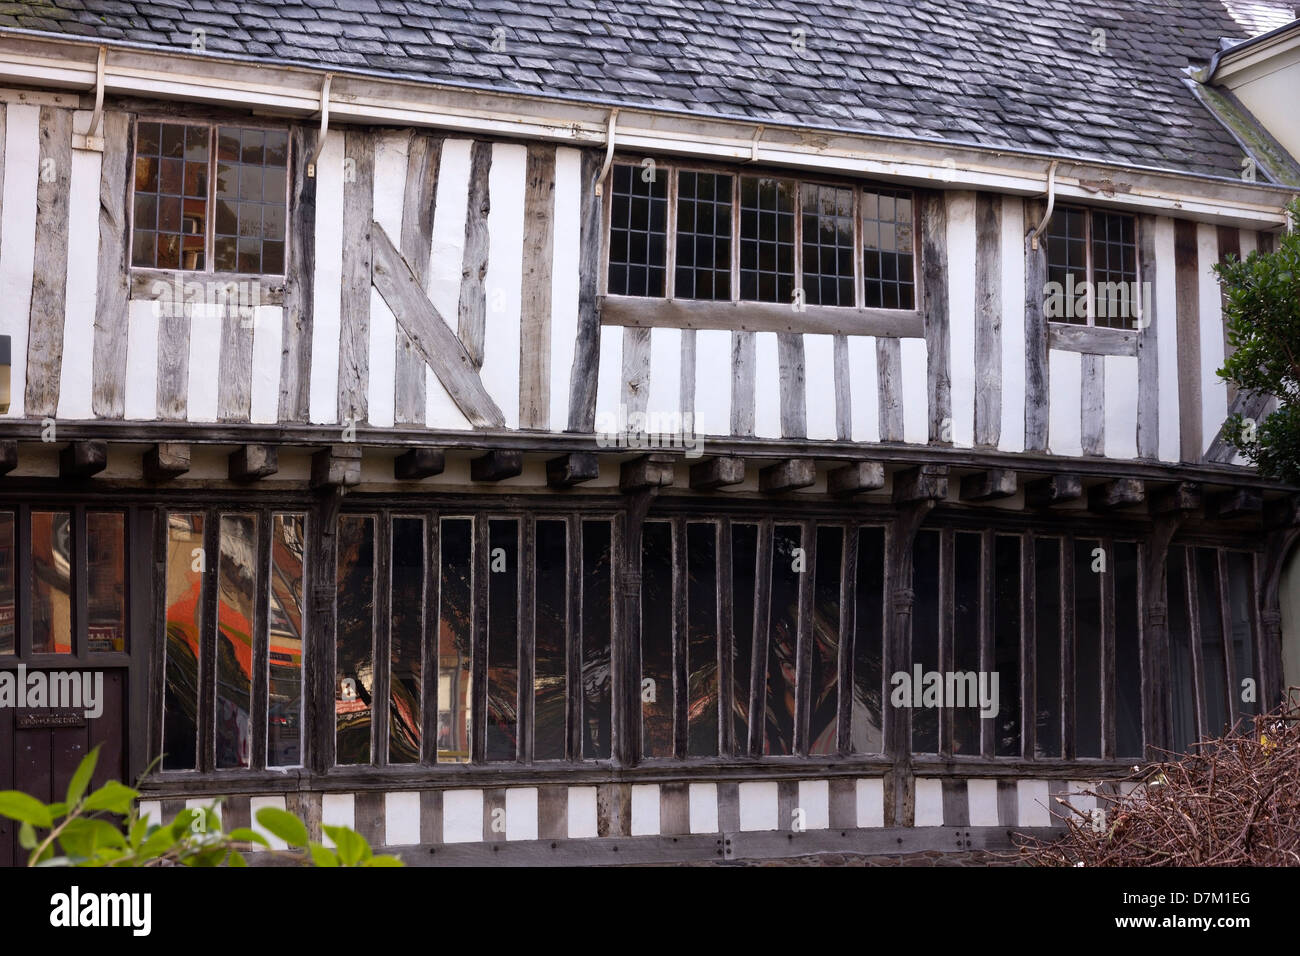 Ancient old oak timbered building, Wygston's House, the oldest house in Leicester dating from 1490, Leicester, England, UK Stock Photo